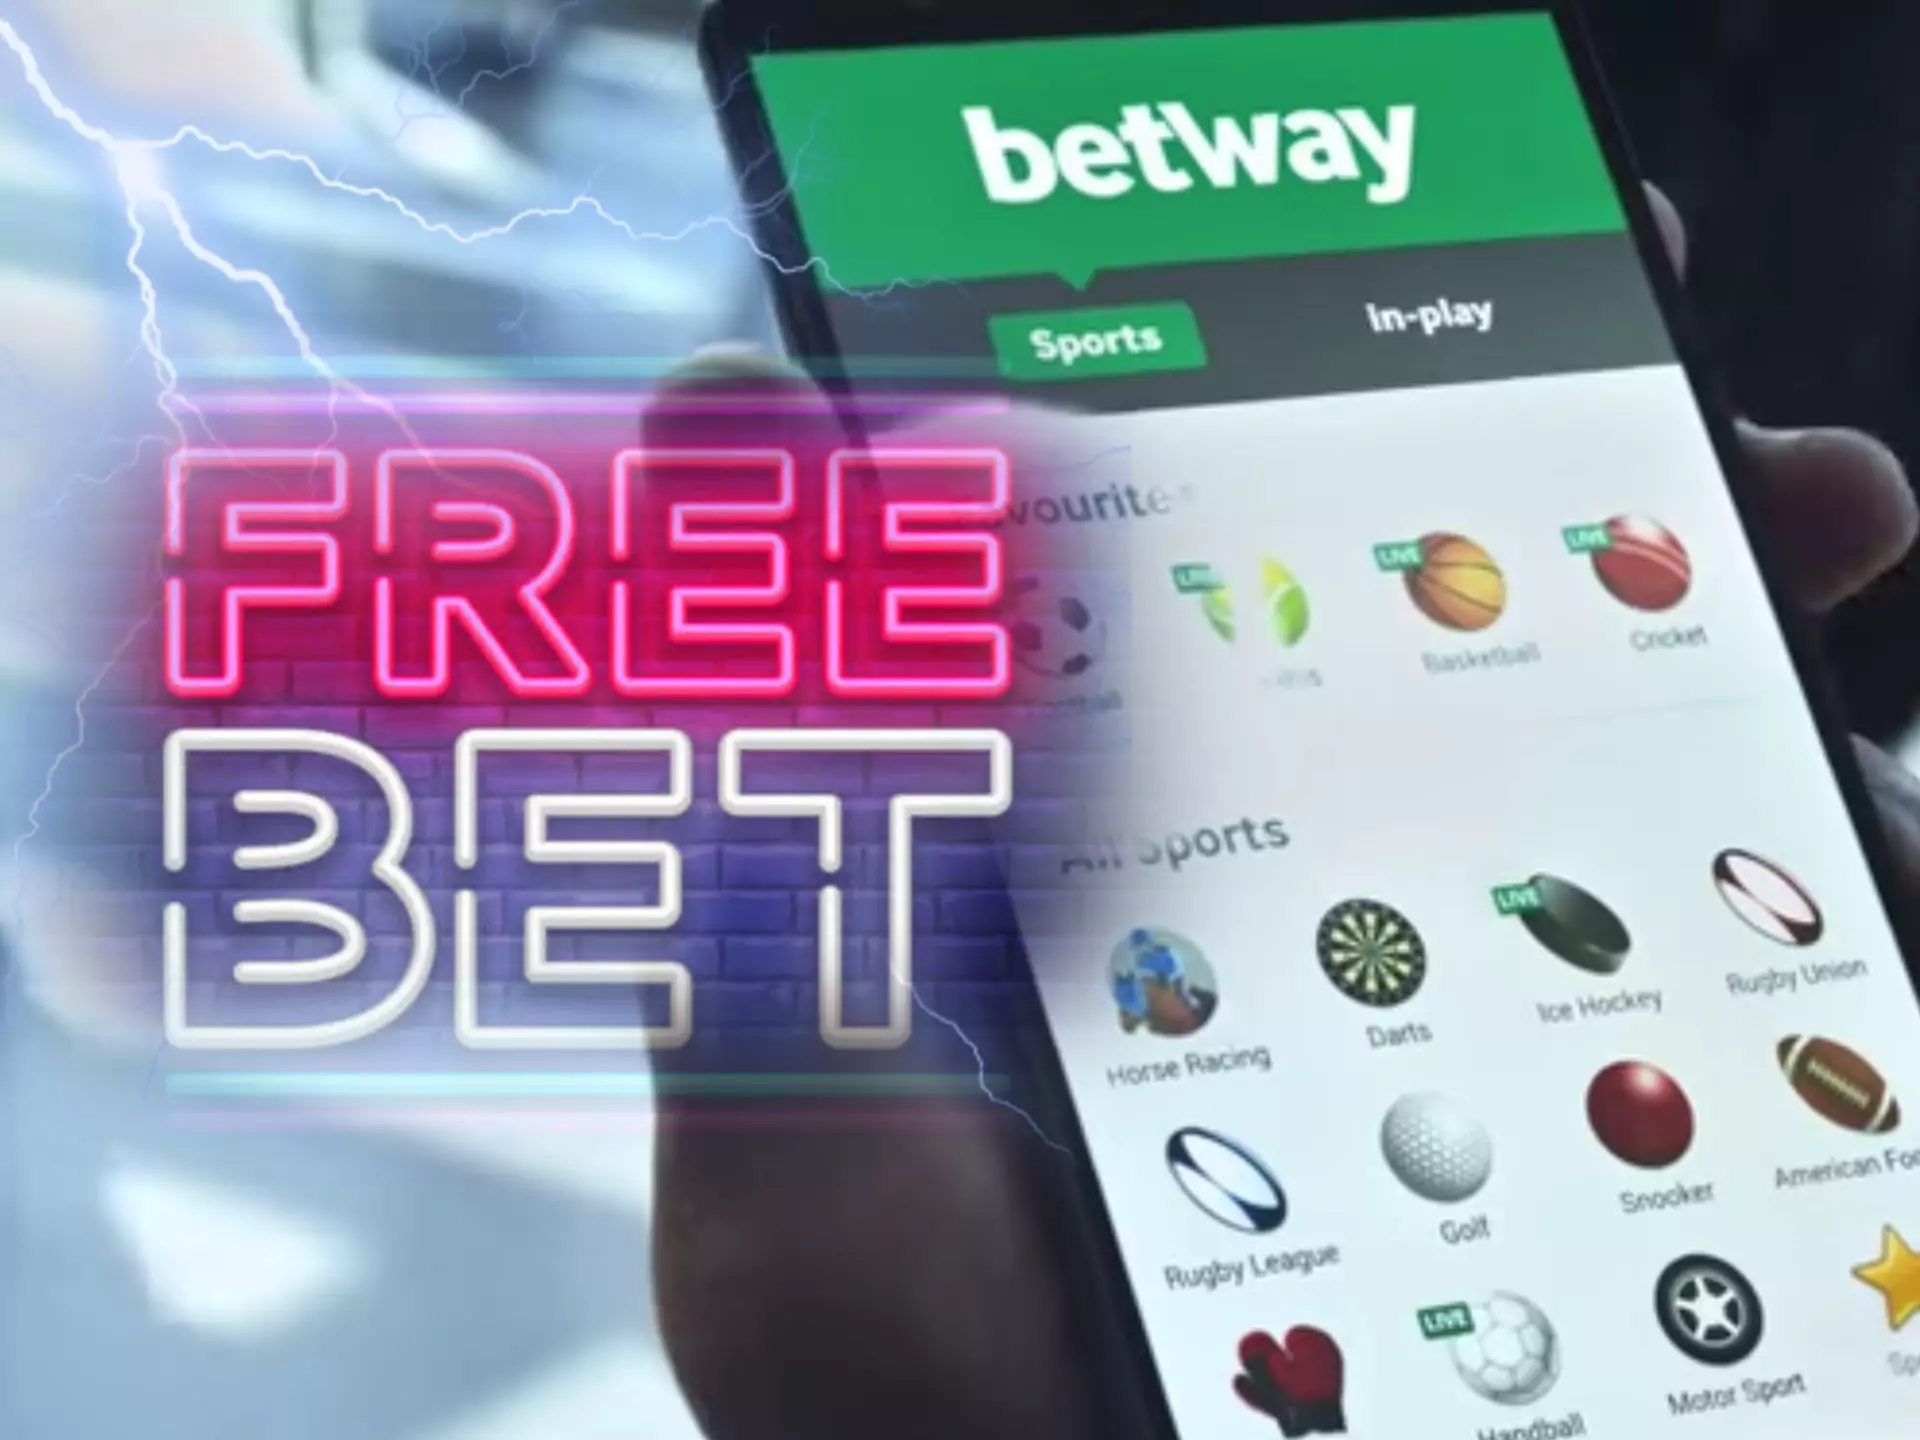 You can spend your welcome free bets on cricket betting via Betway app.